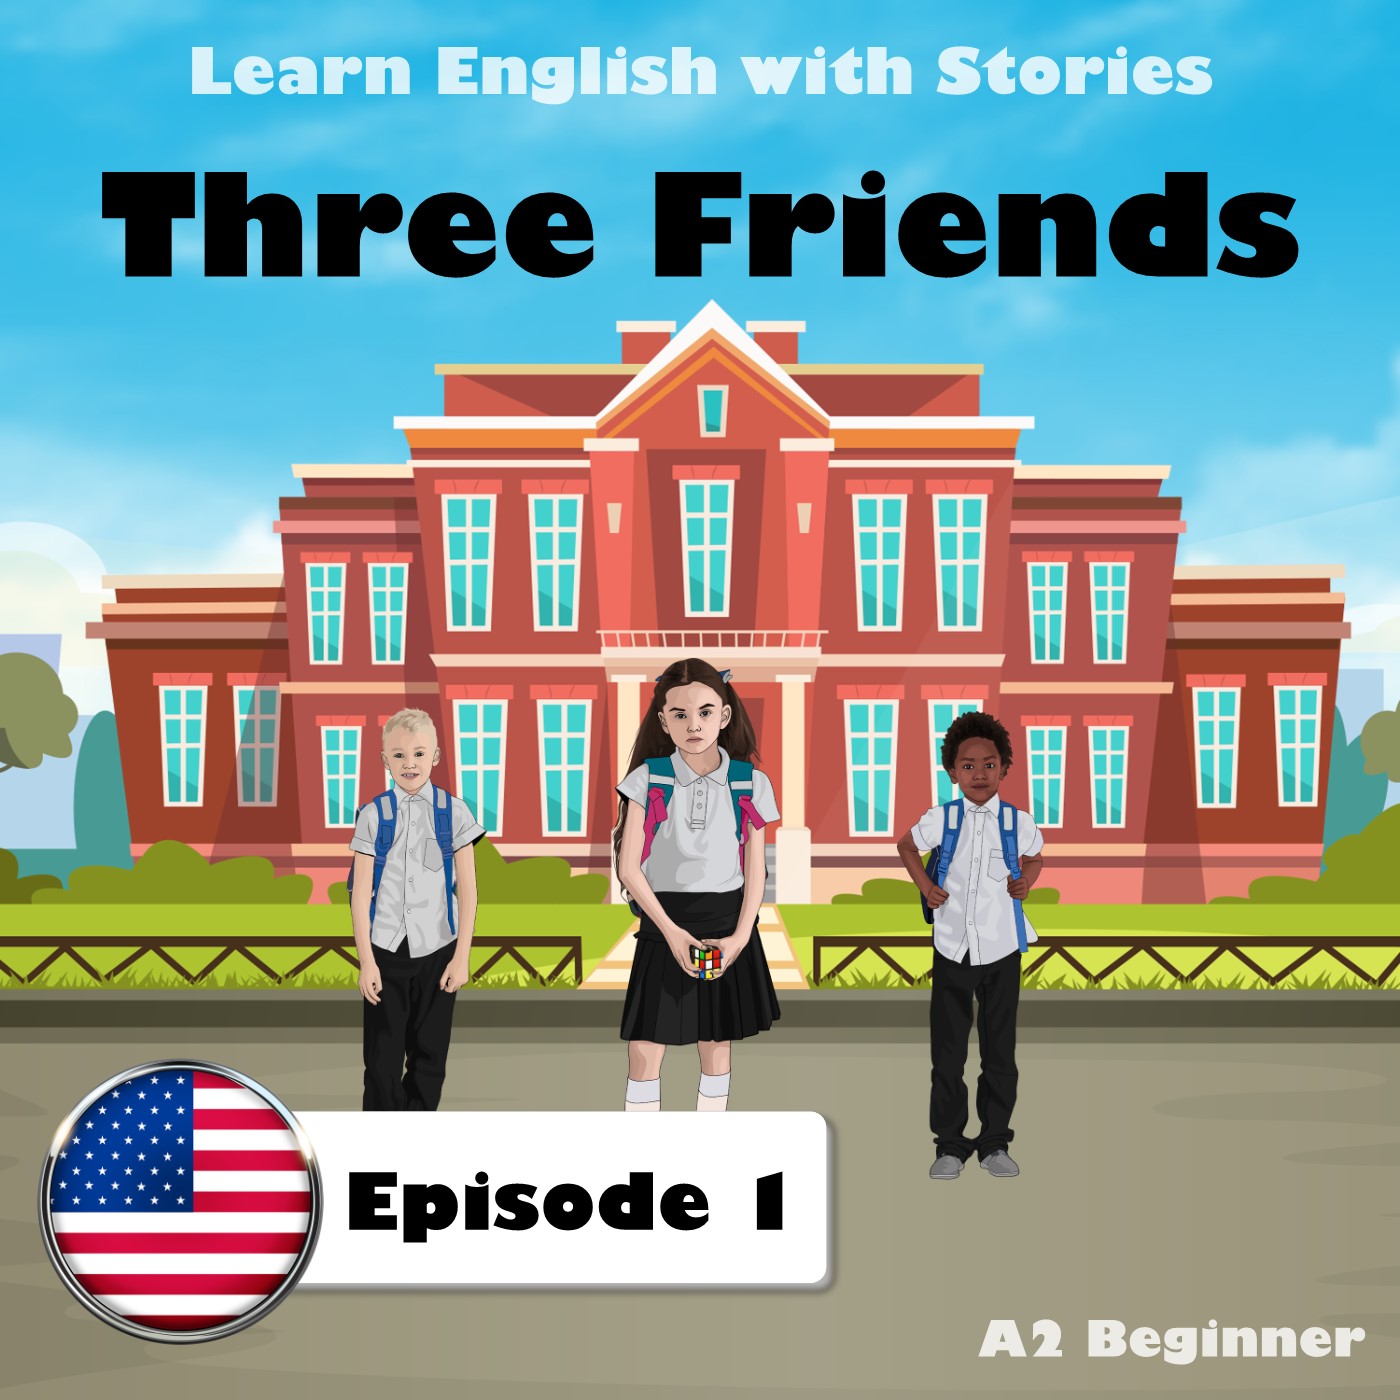 Learn English with Stories: Three Friends, Episode 1 (A2 Beginner)